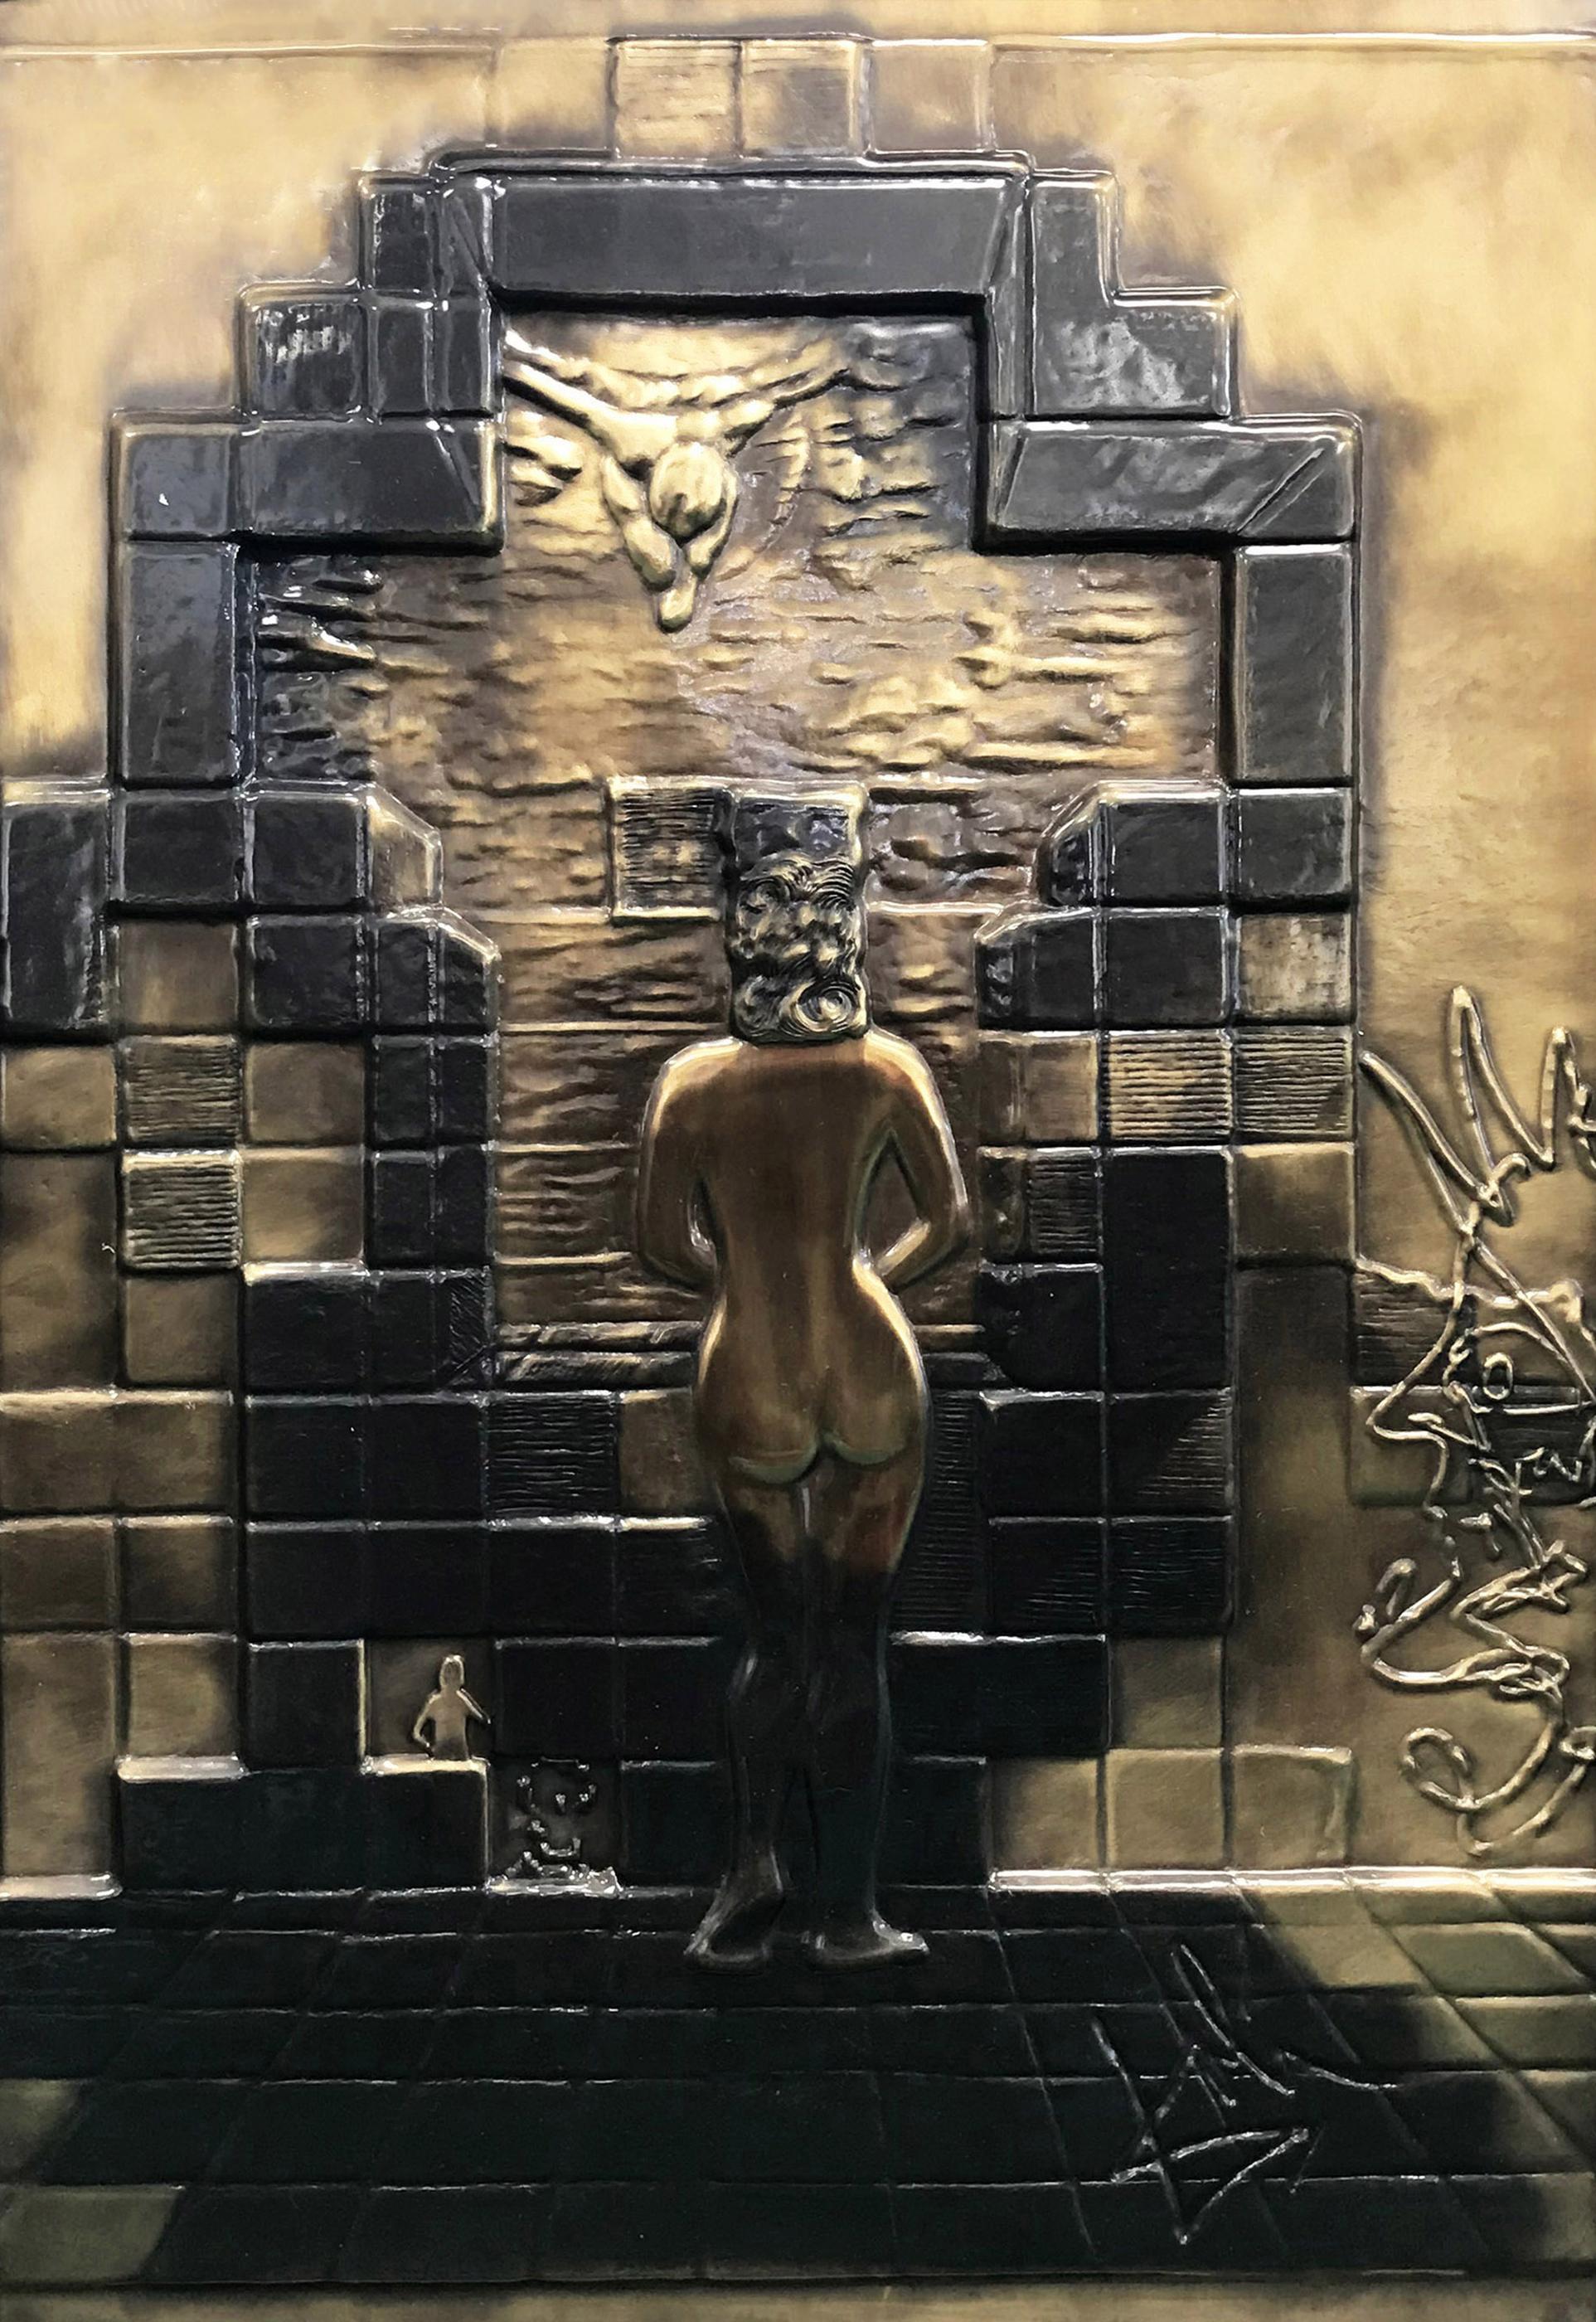 LINCOLN IN DALIVISION (BRONZE) - Sculpture by Salvador Dalí